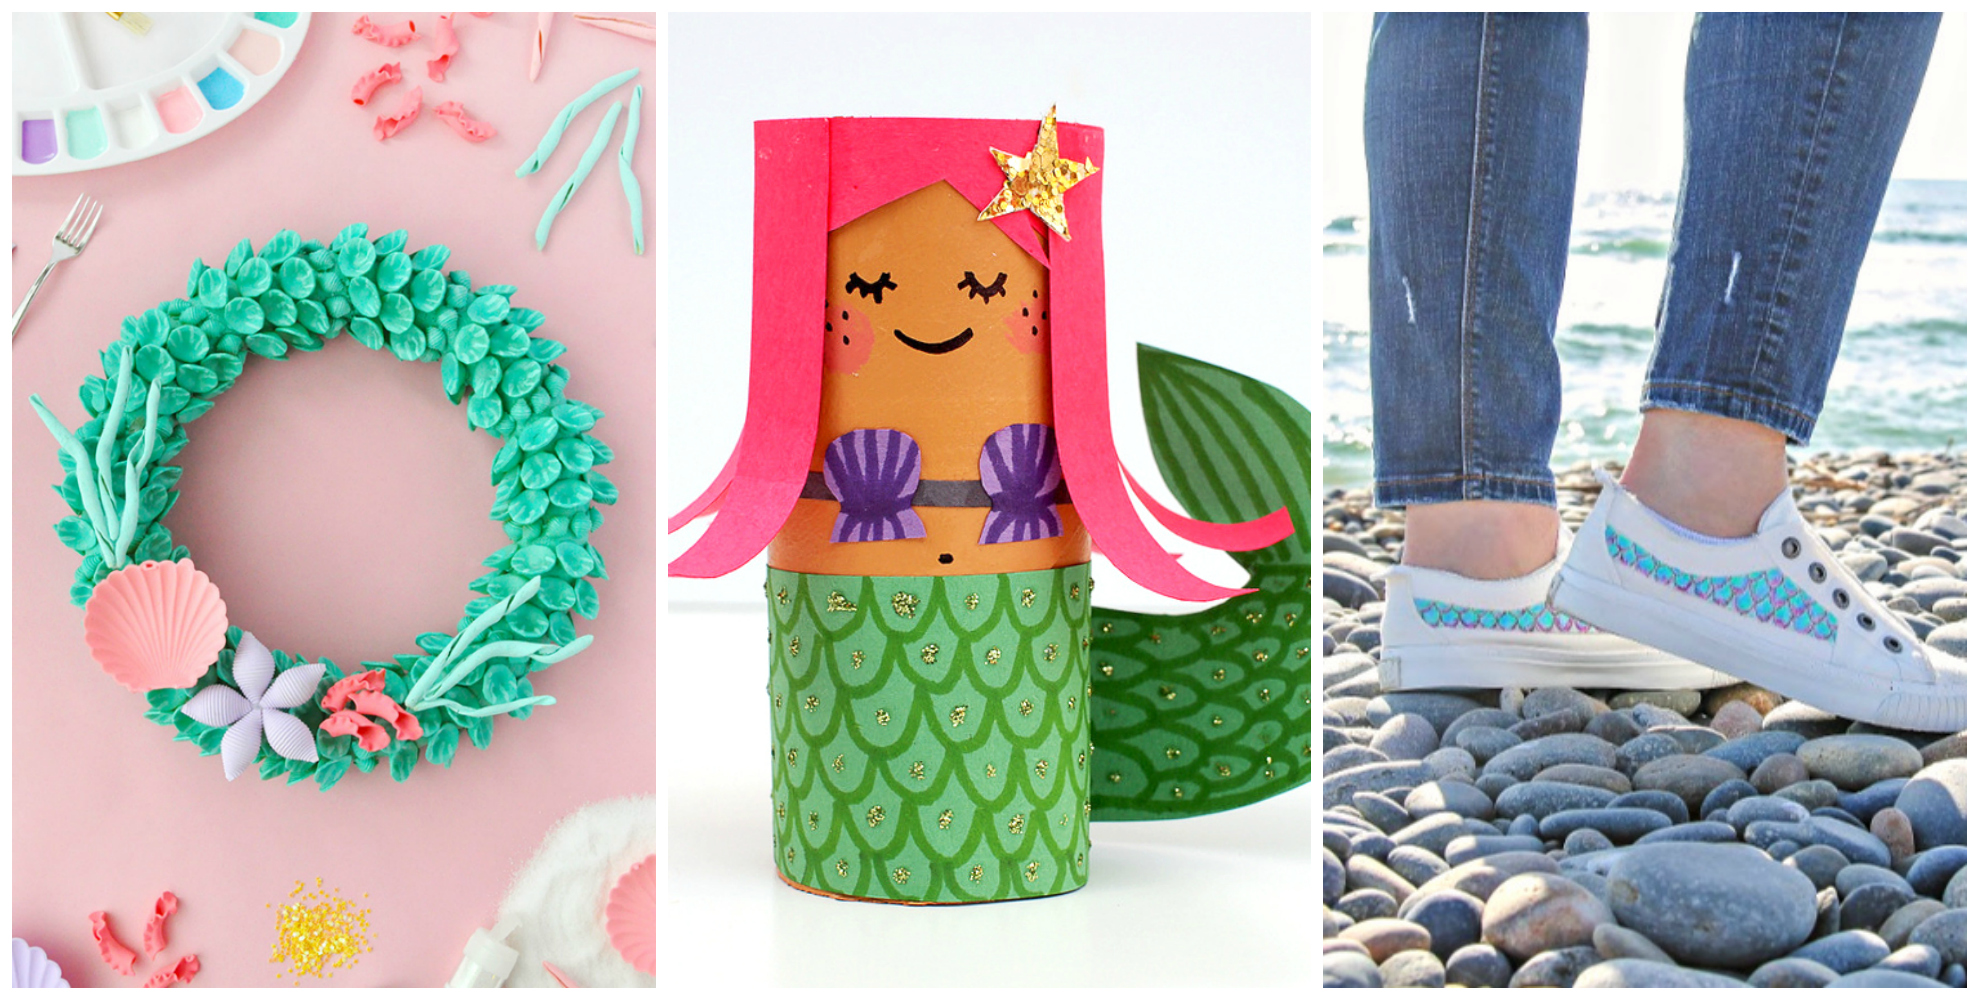 9-now-ideas-mermaid-crafts-for-kids